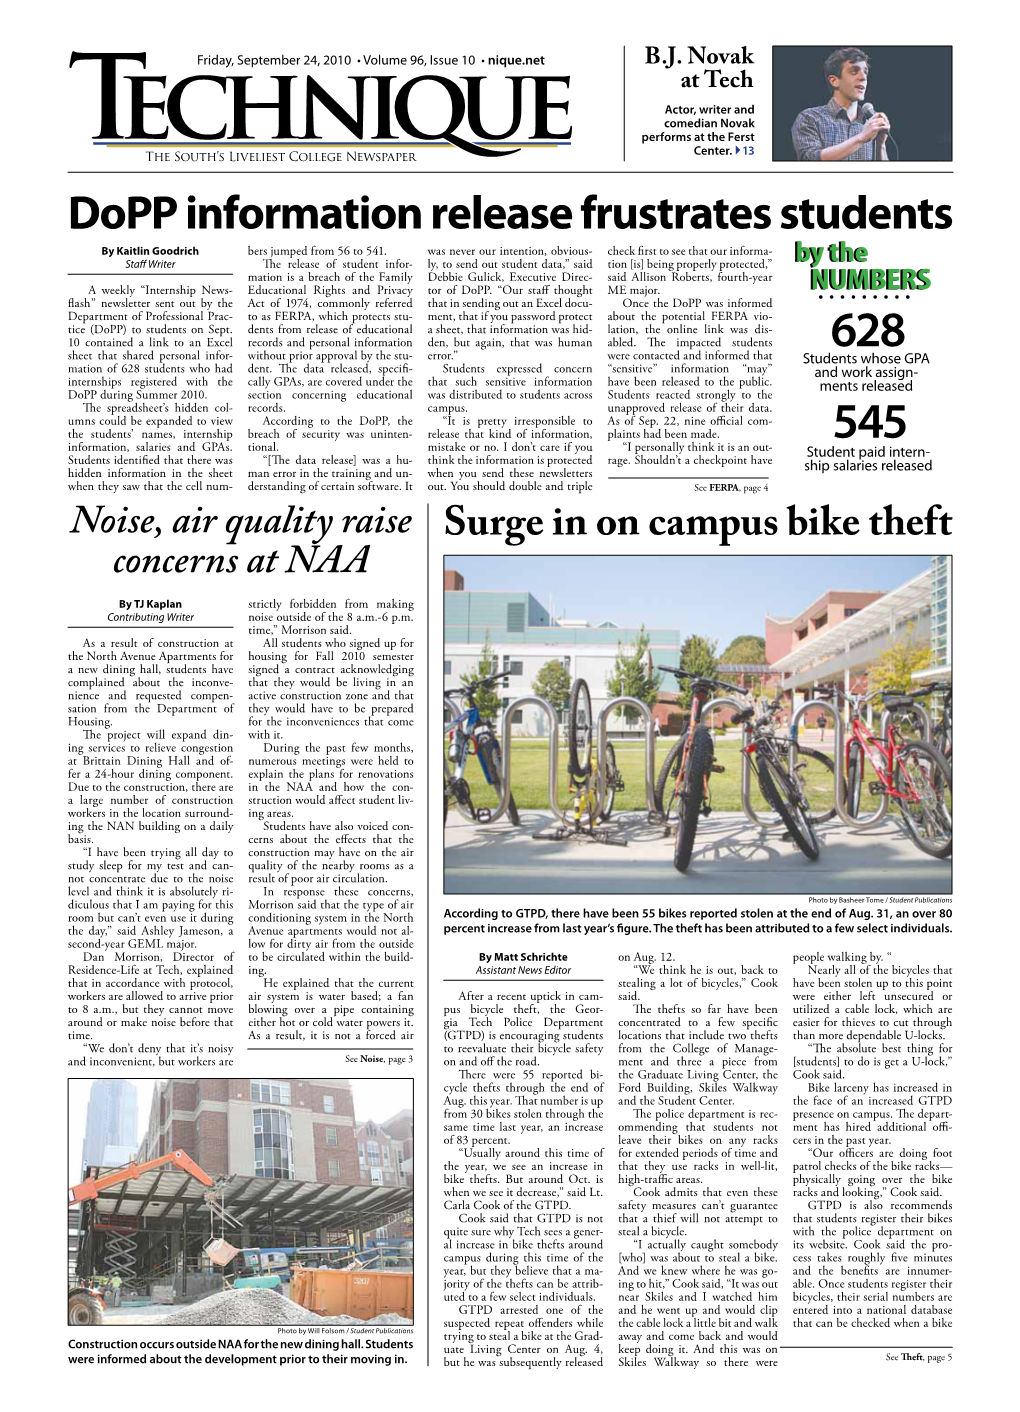 Dopp Information Release Frustrates Students by Kaitlin Goodrich Bers Jumped from 56 to 541